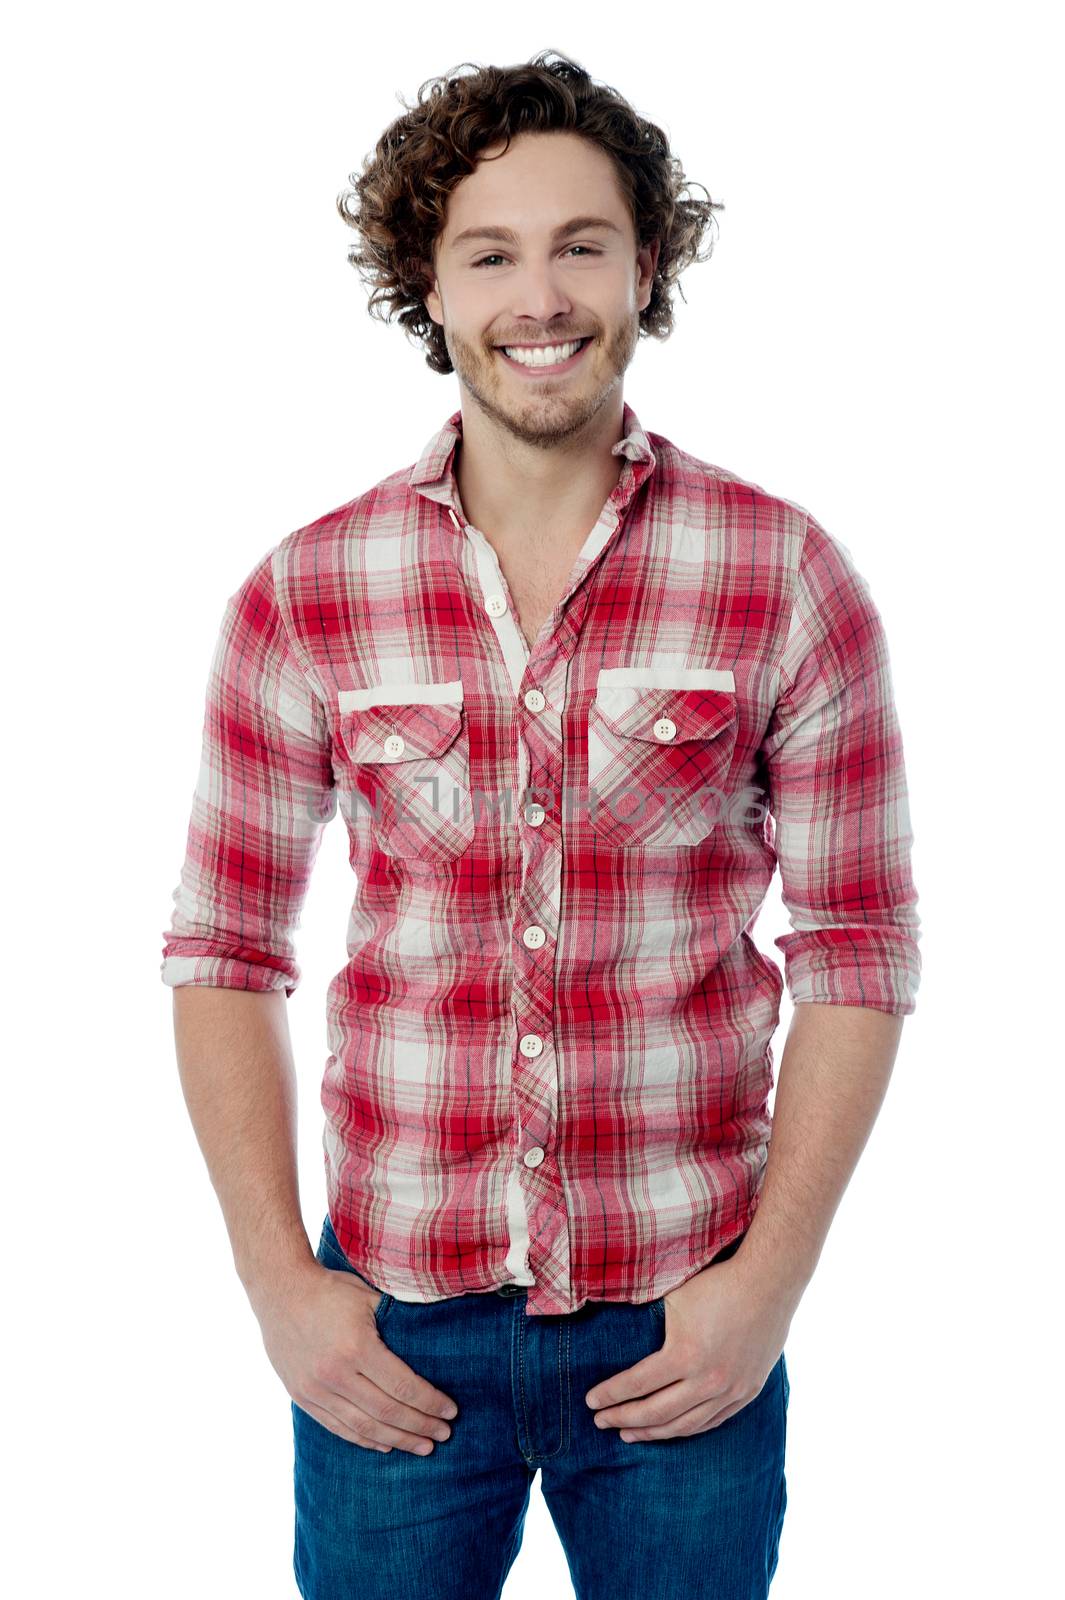 Smiling young man posing in casual wear 